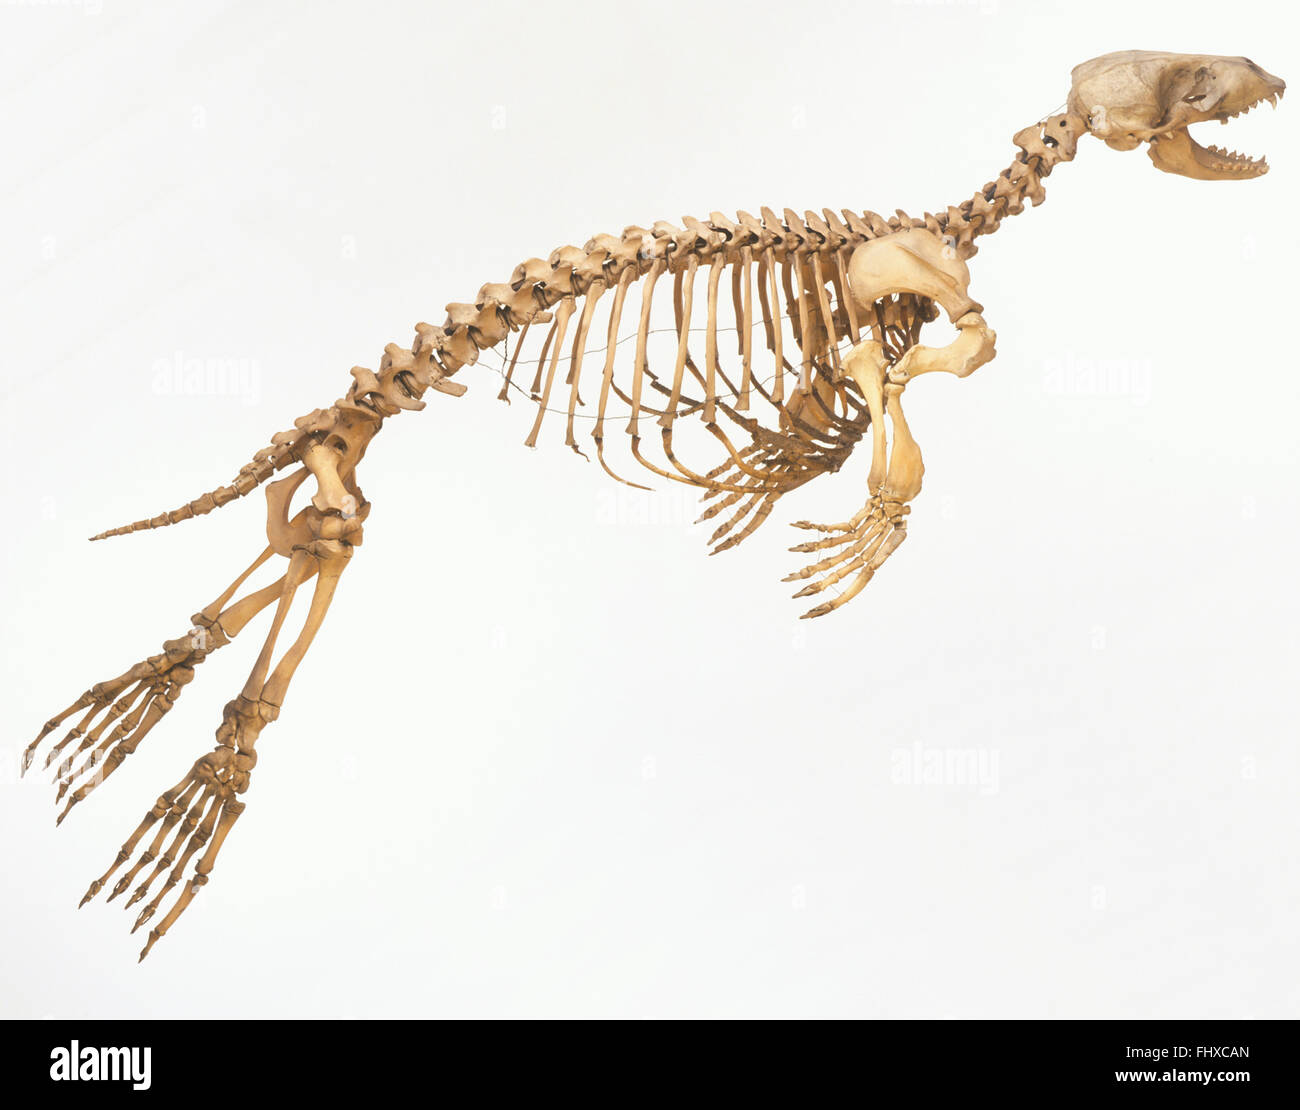 Skeleton of a Harbour seal (Phoca vitulina) 'in motion', side view Stock Photo